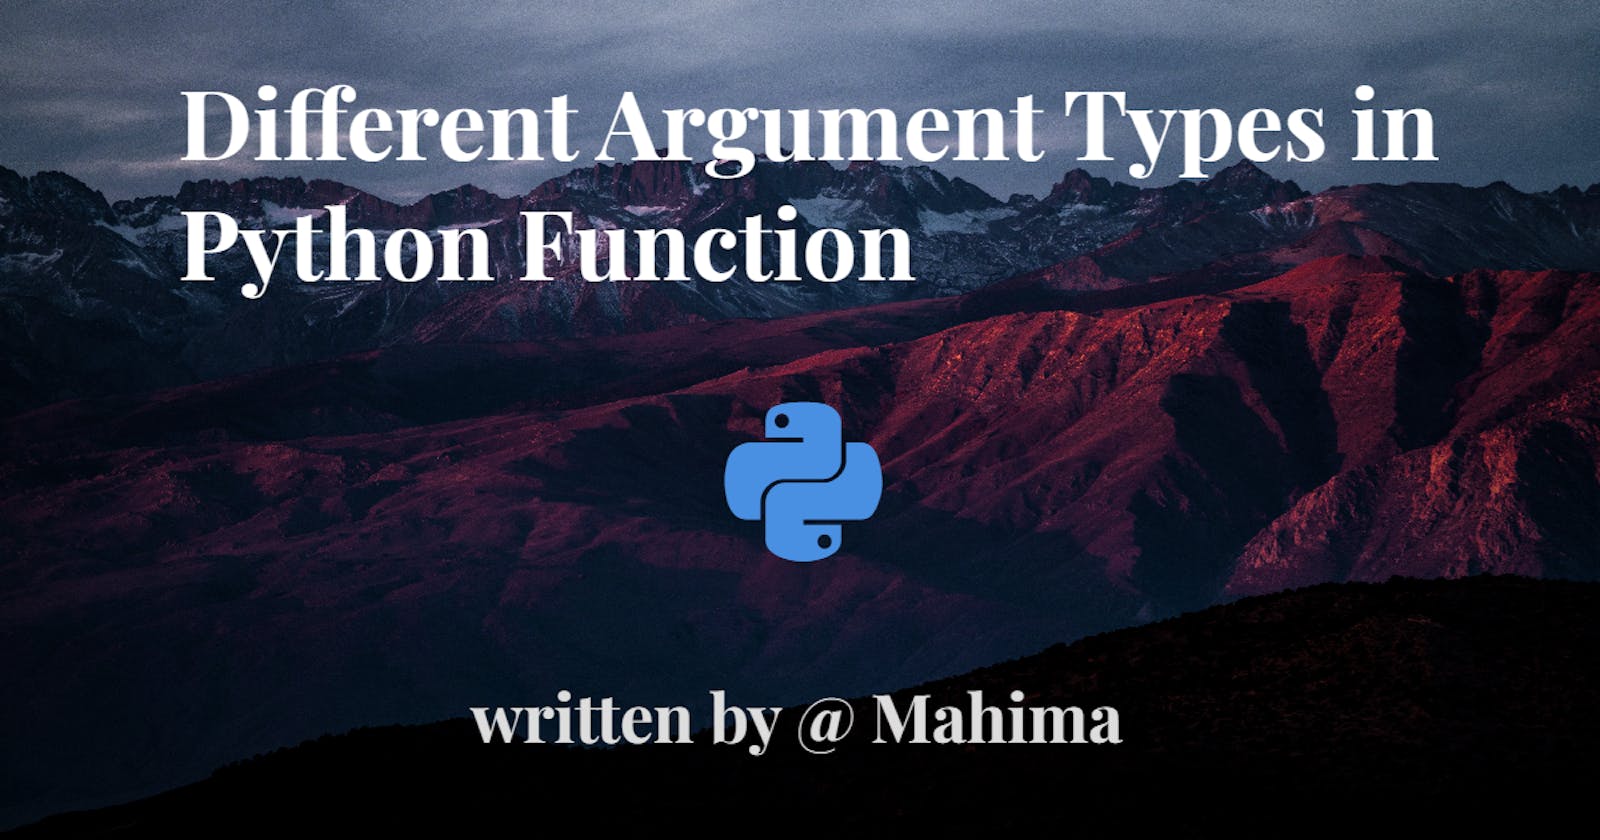 Different Argument Types in Python Function